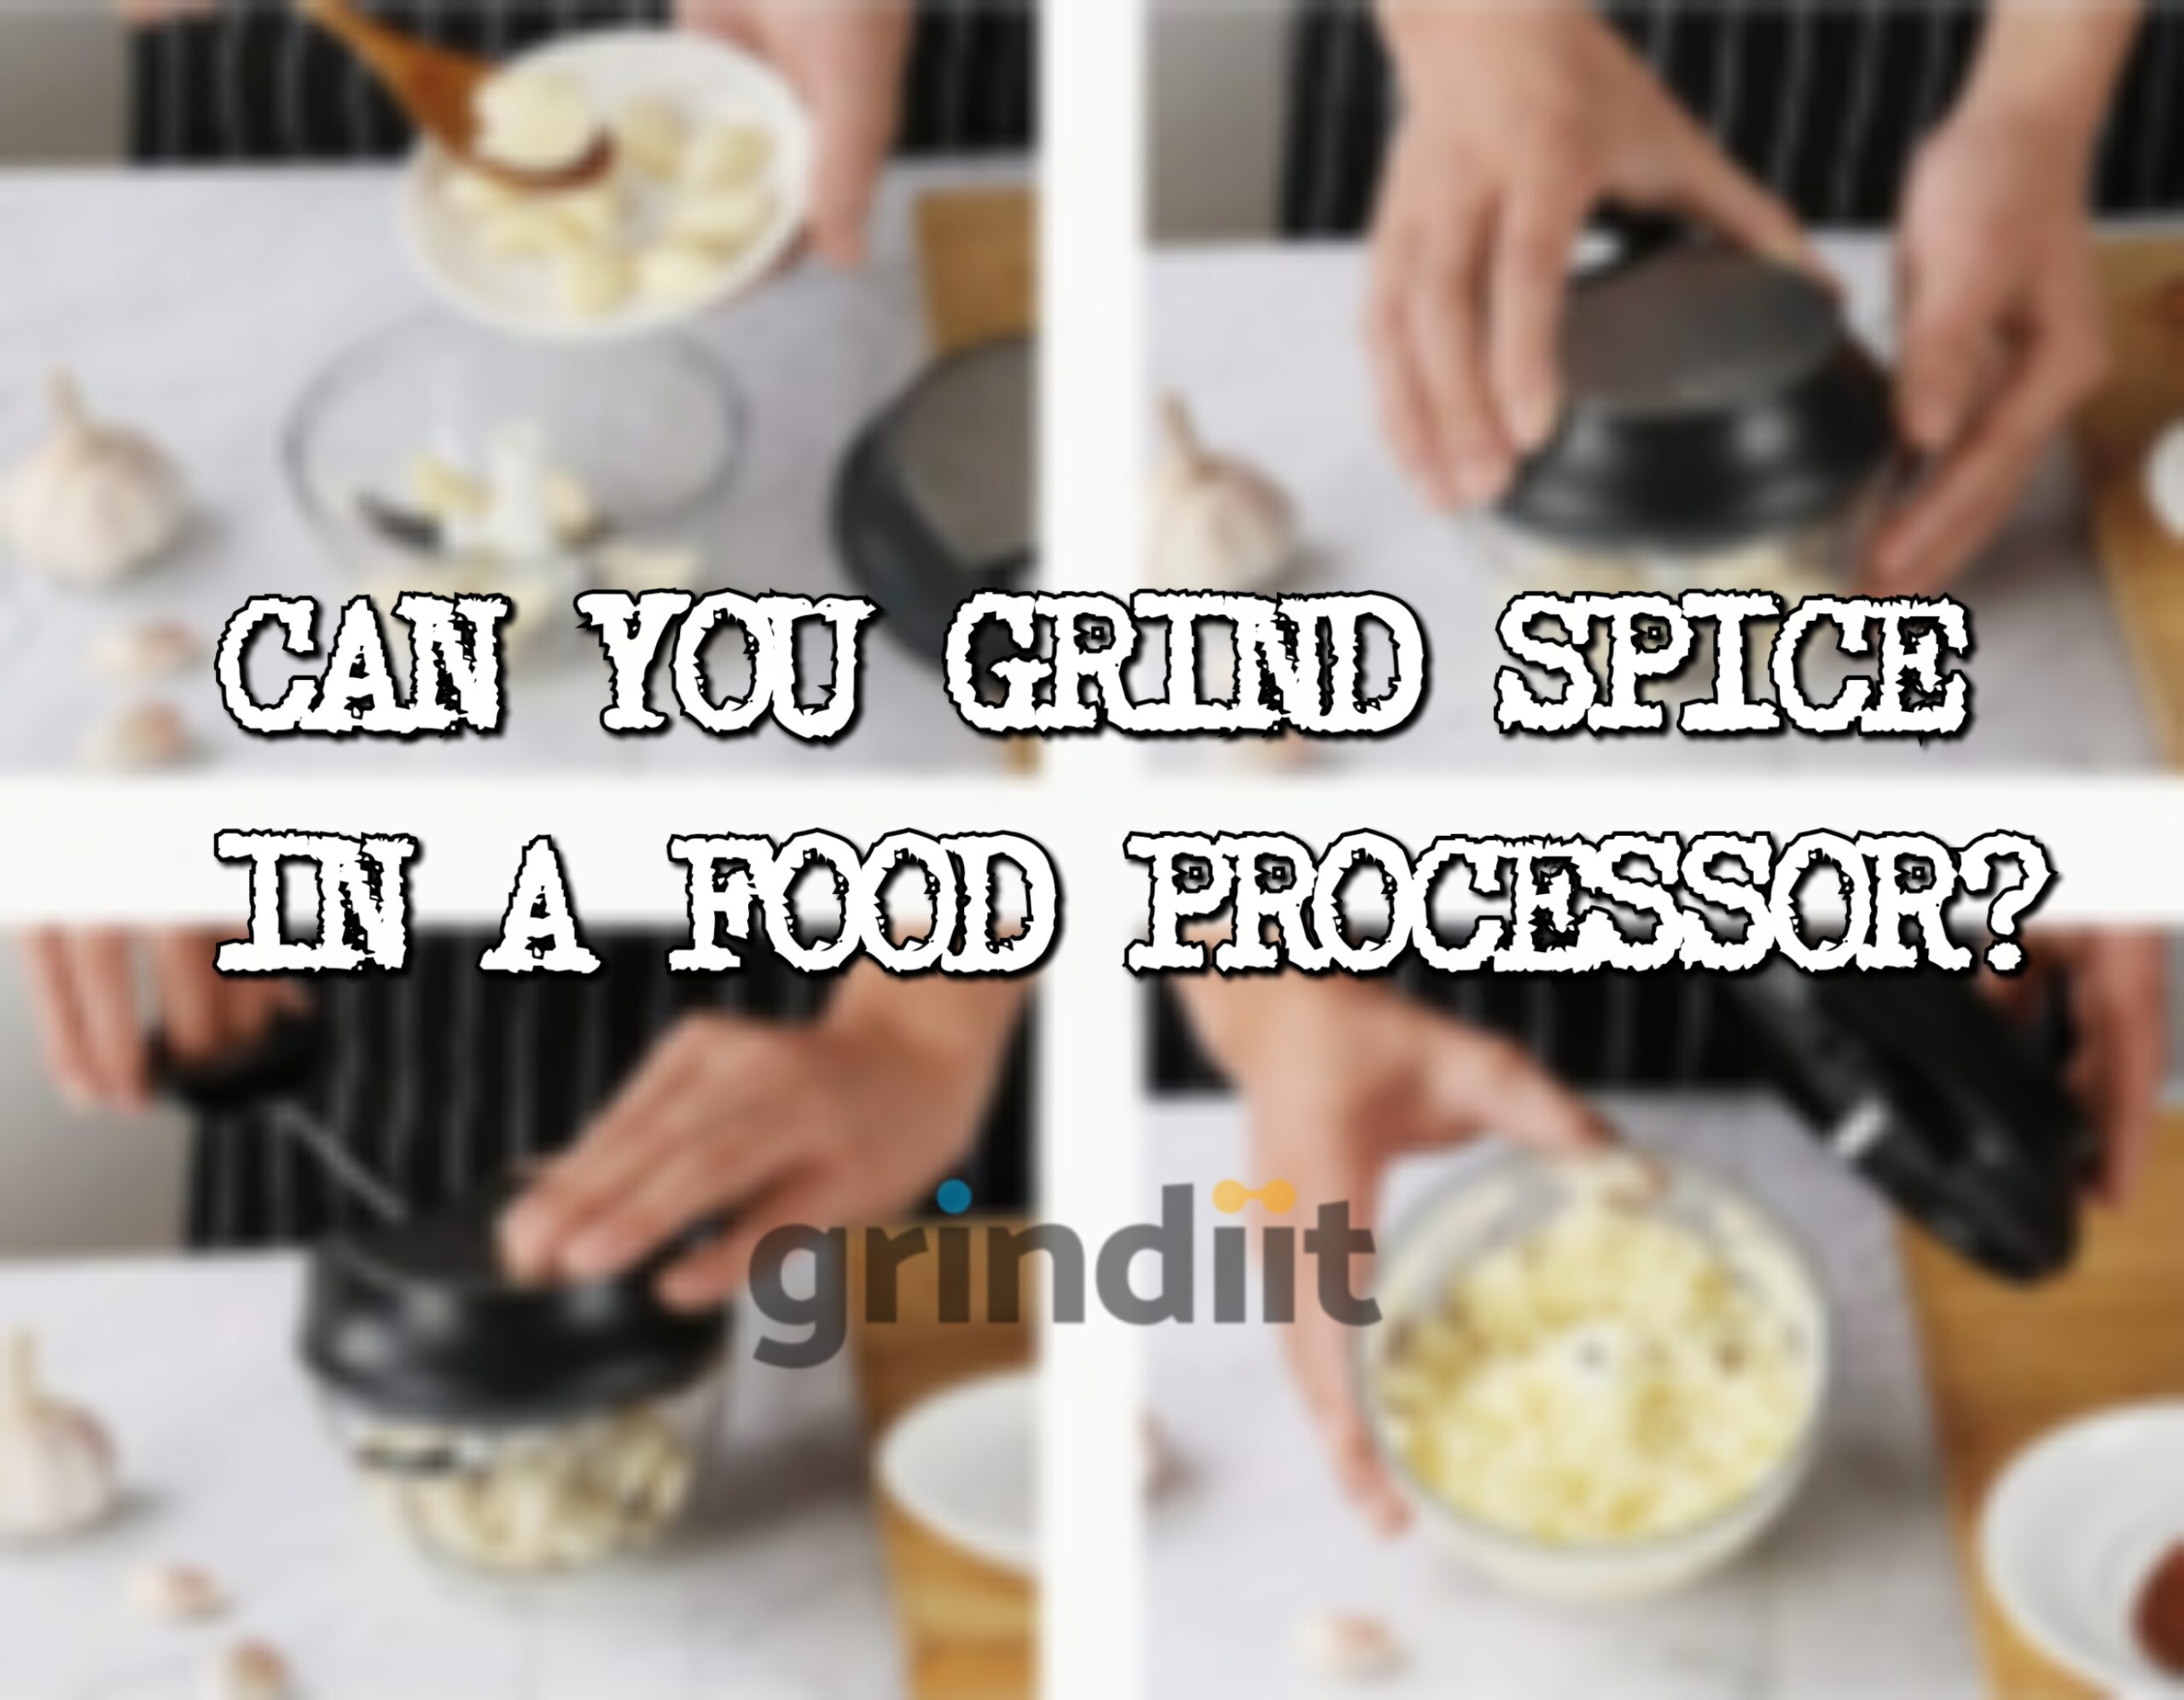 can you grind spices in a blender, how to grind spices, spice grinder, food processor dry grinding, can you grind spices in a nutribullet, mortar and pestle, what spices can you put in a pepper grinder, can you grind cinnamon sticks in food processor,